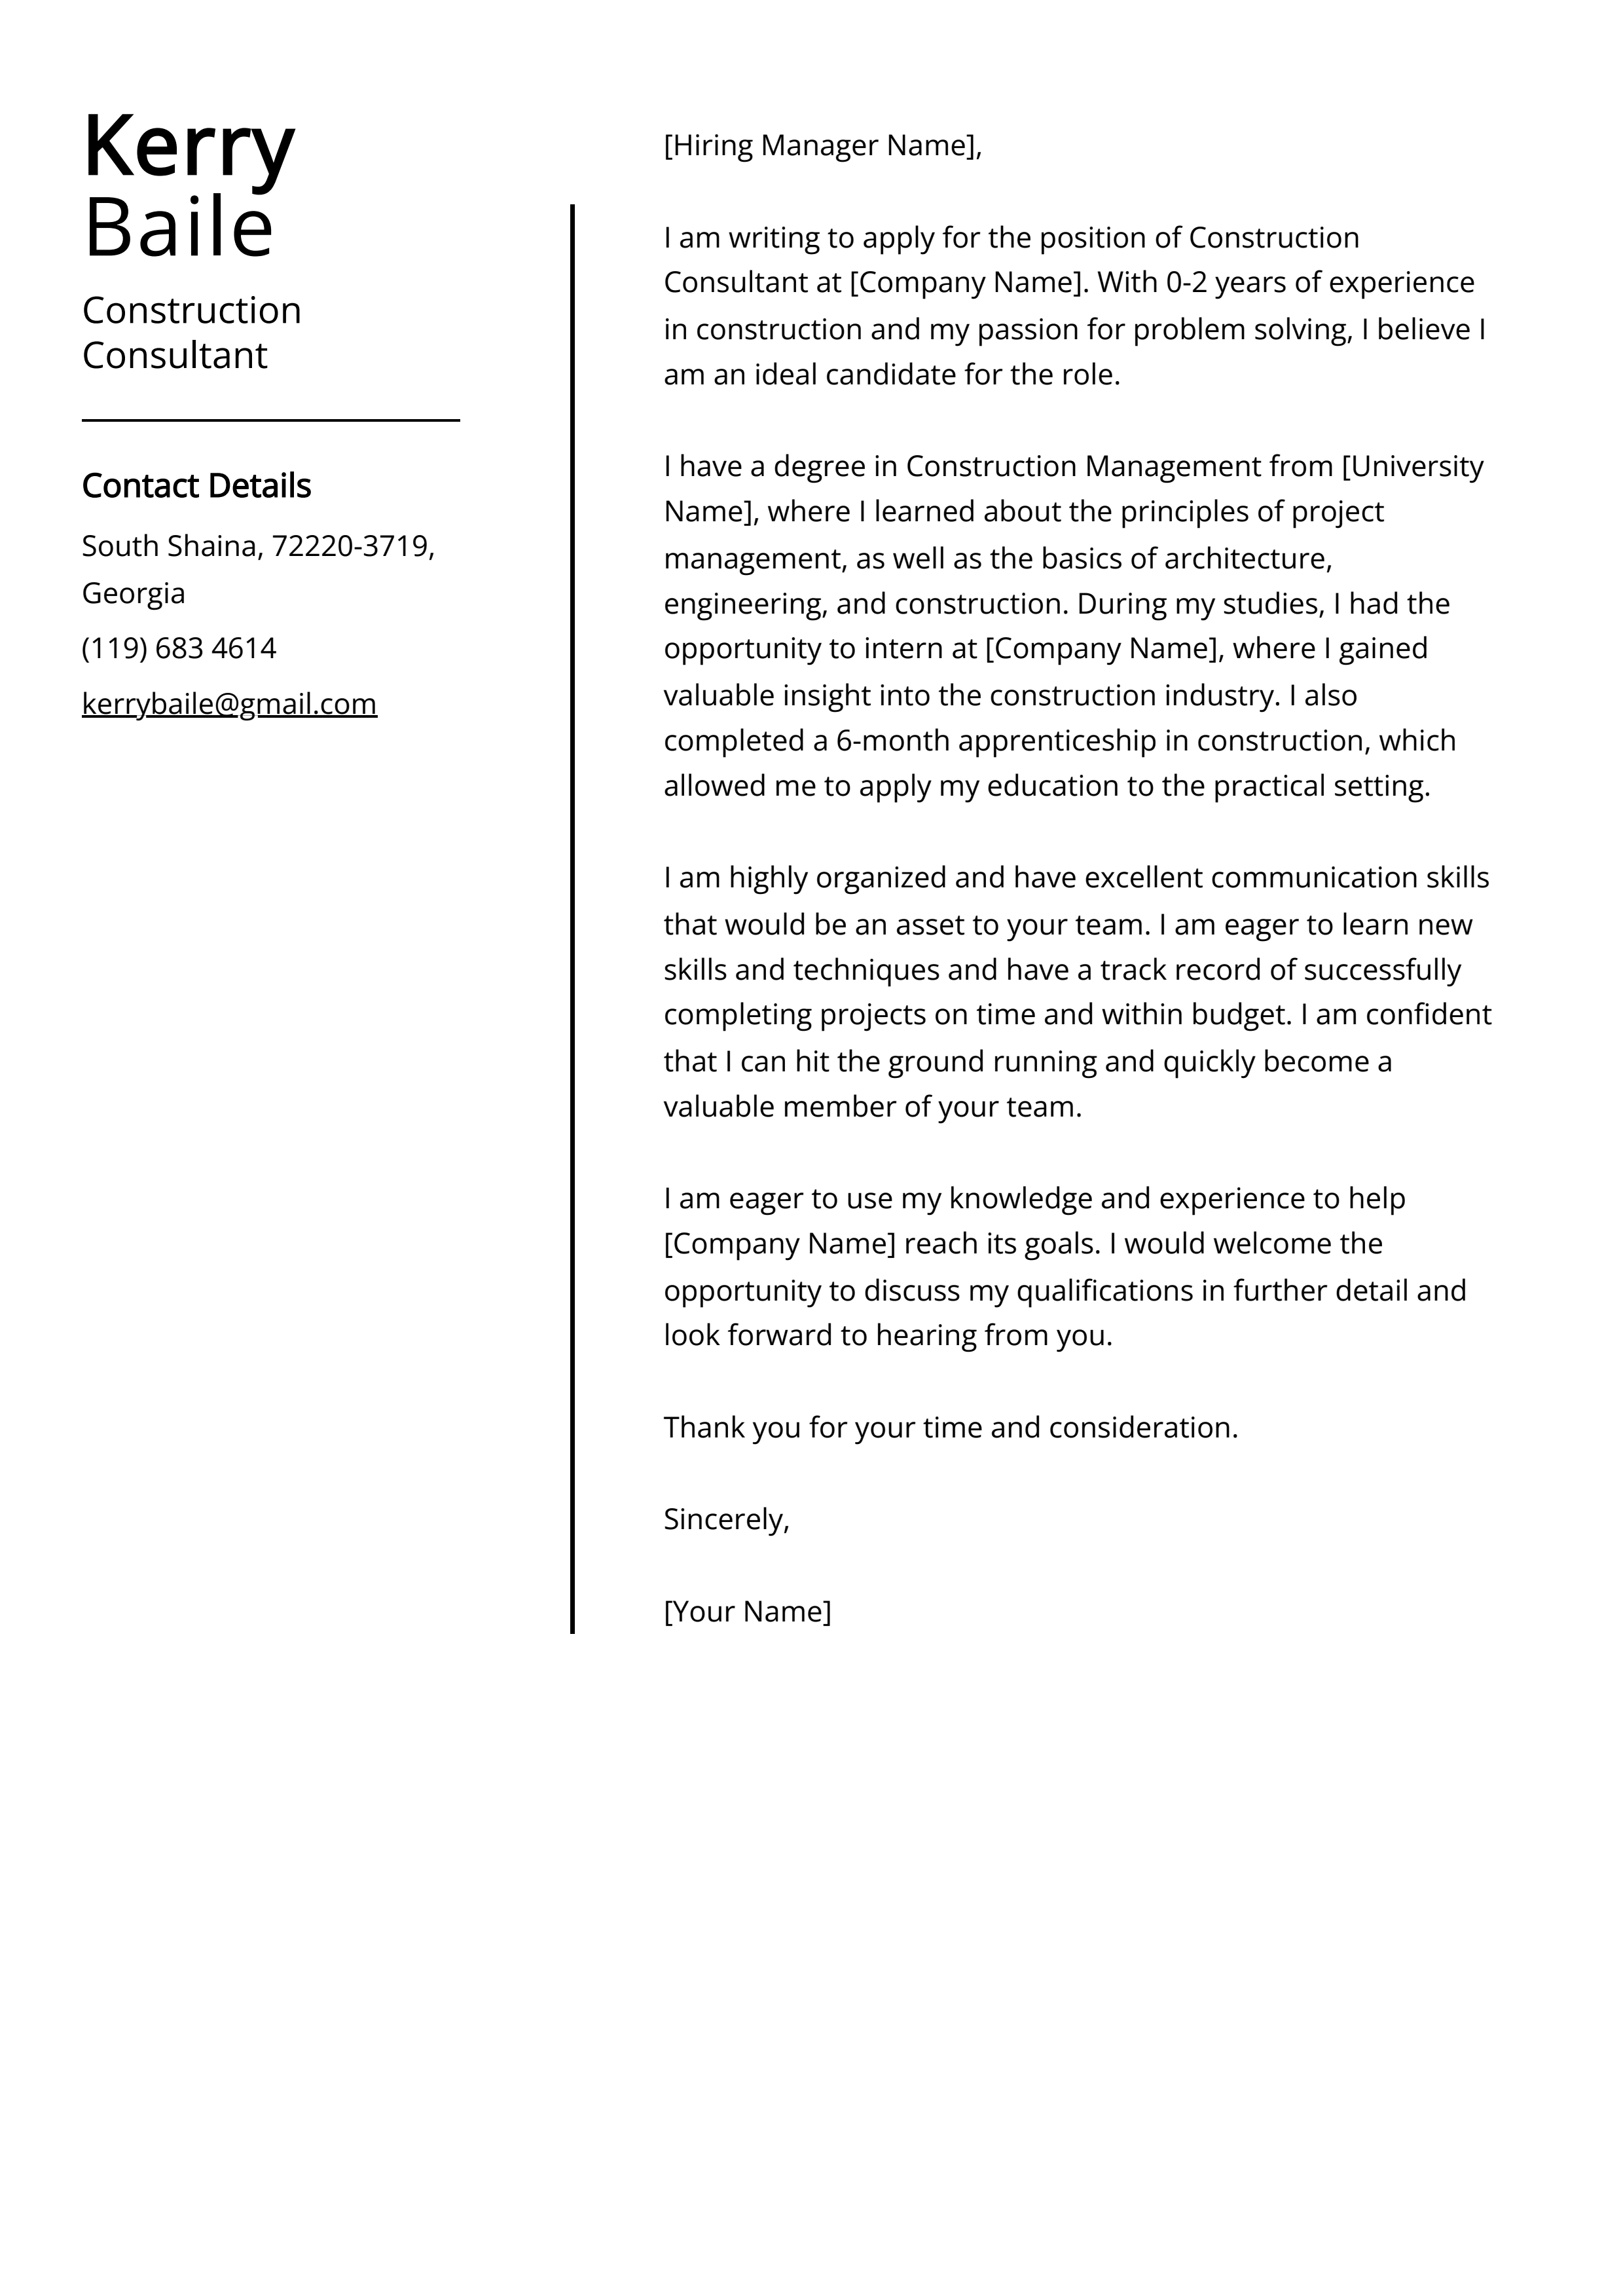 Construction Consultant Cover Letter Example